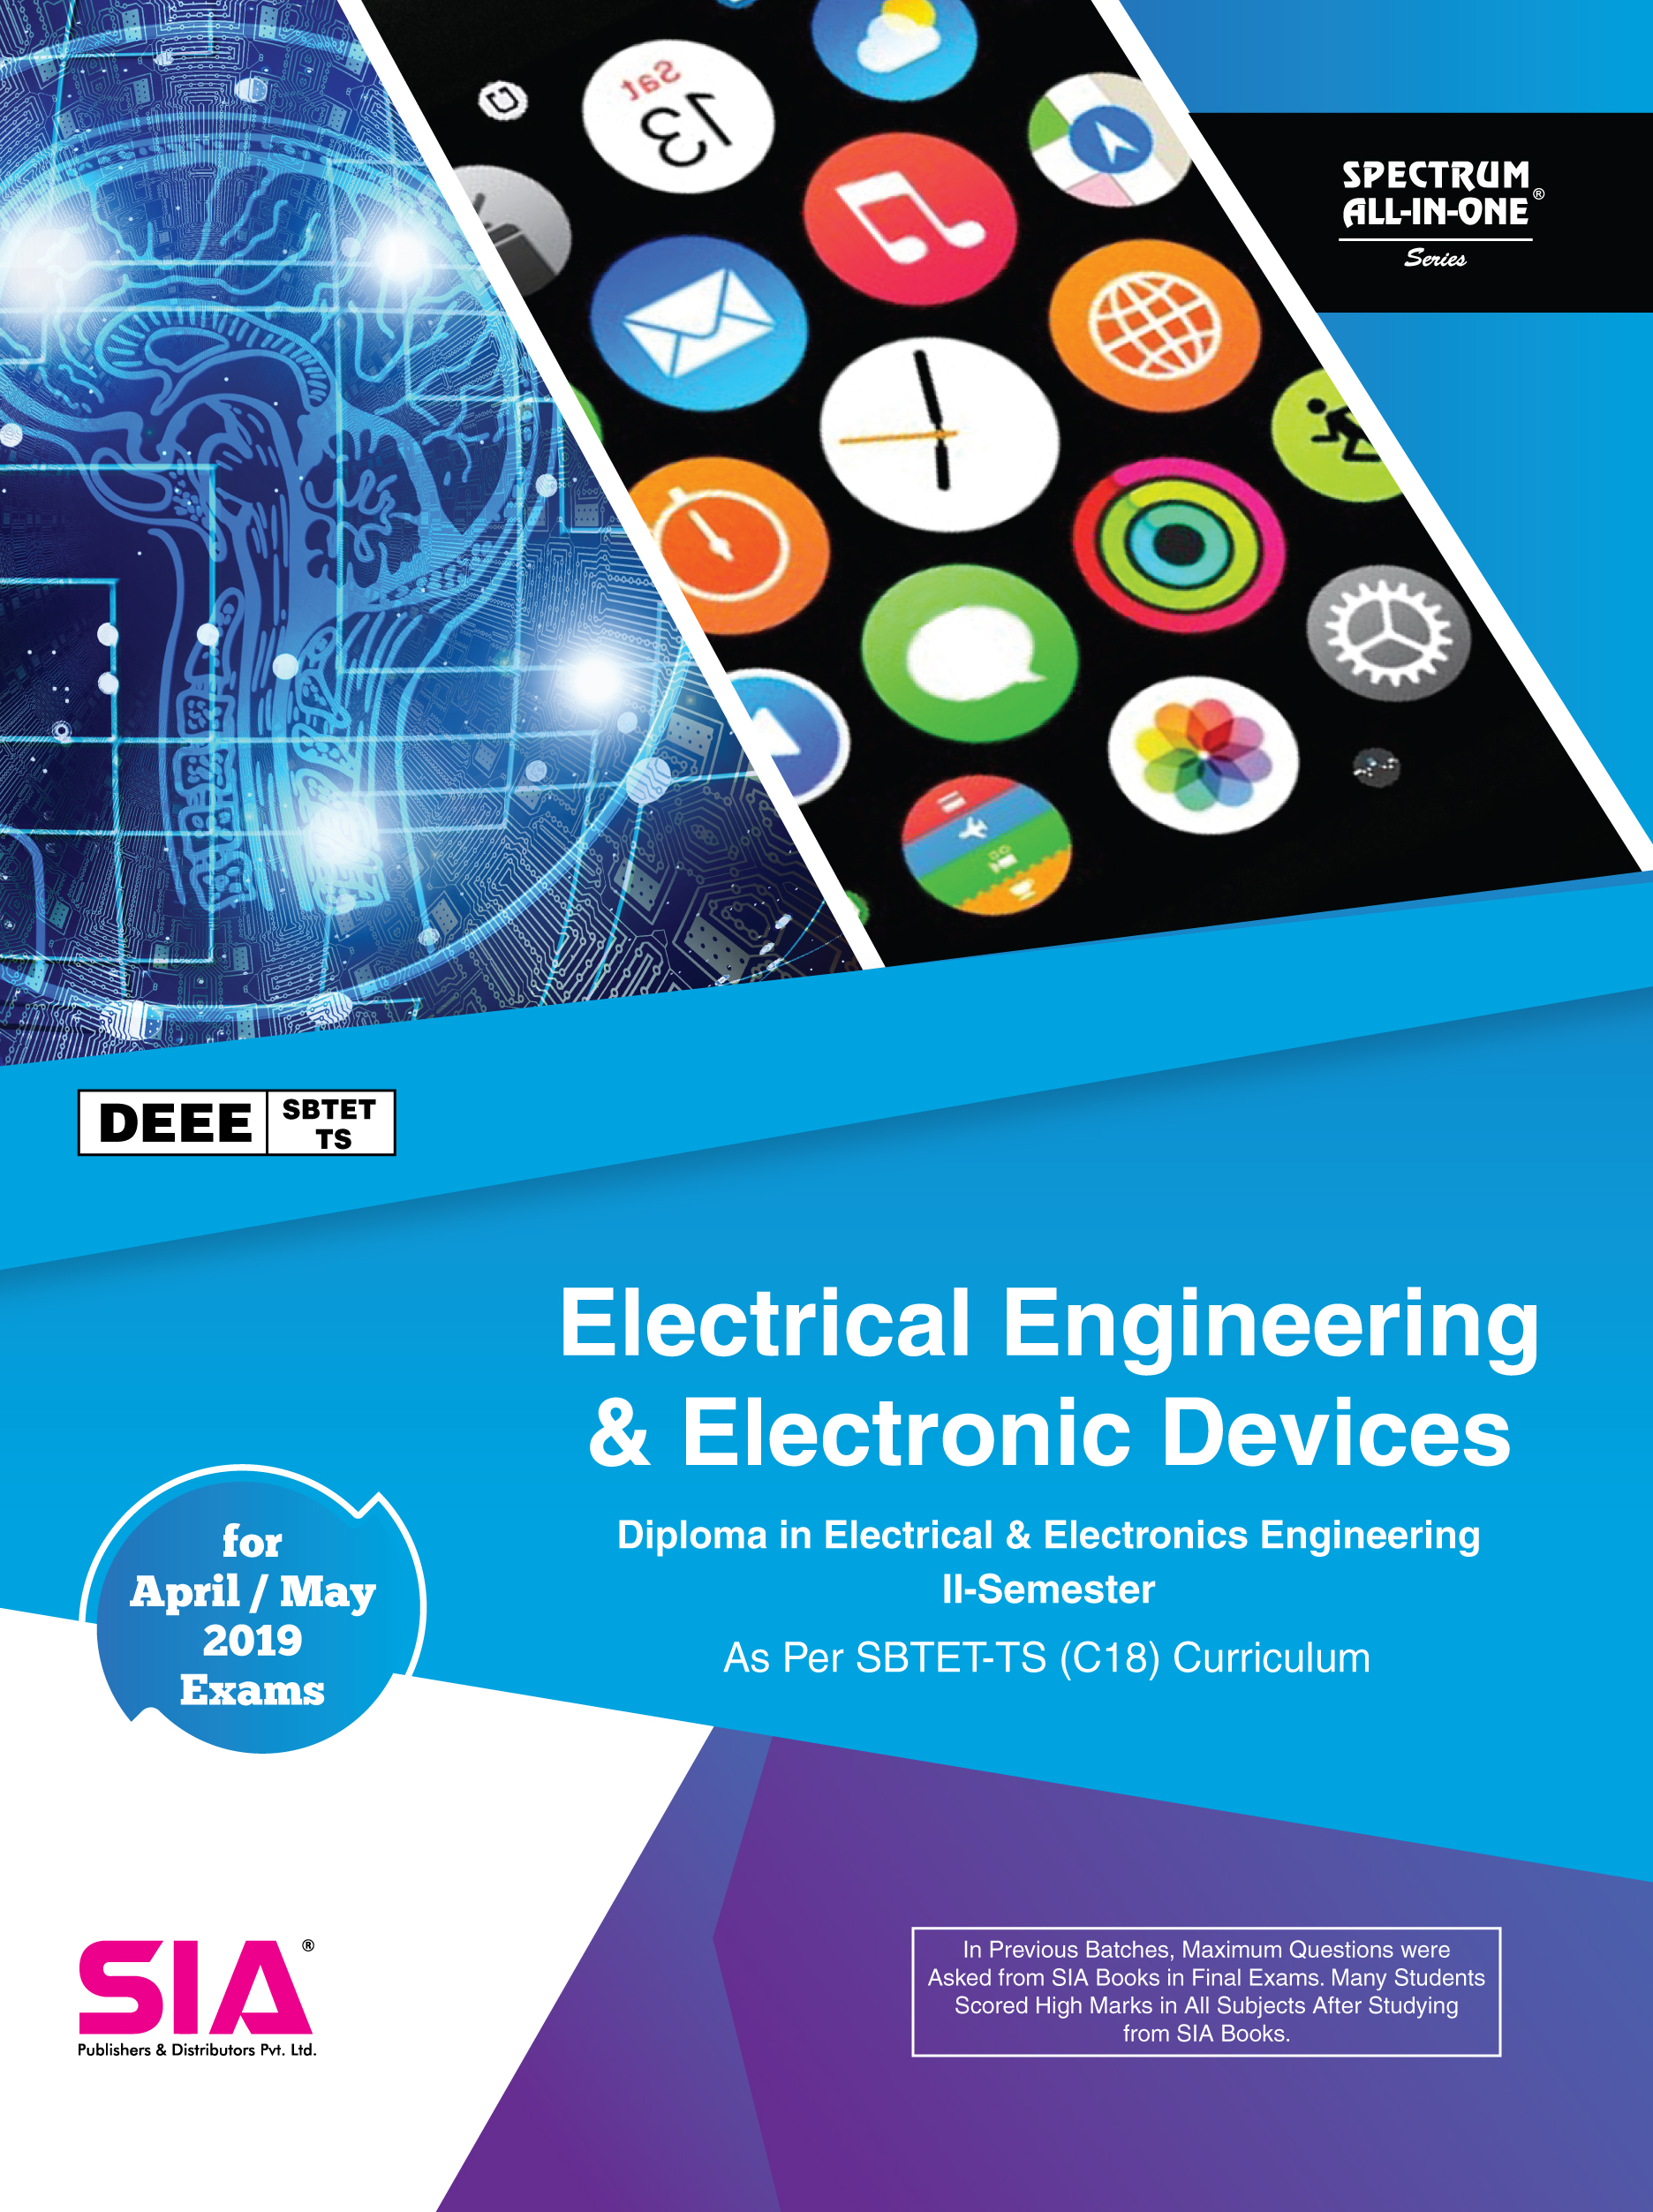 engineering diploma sbtet ts electrical and electronics ts